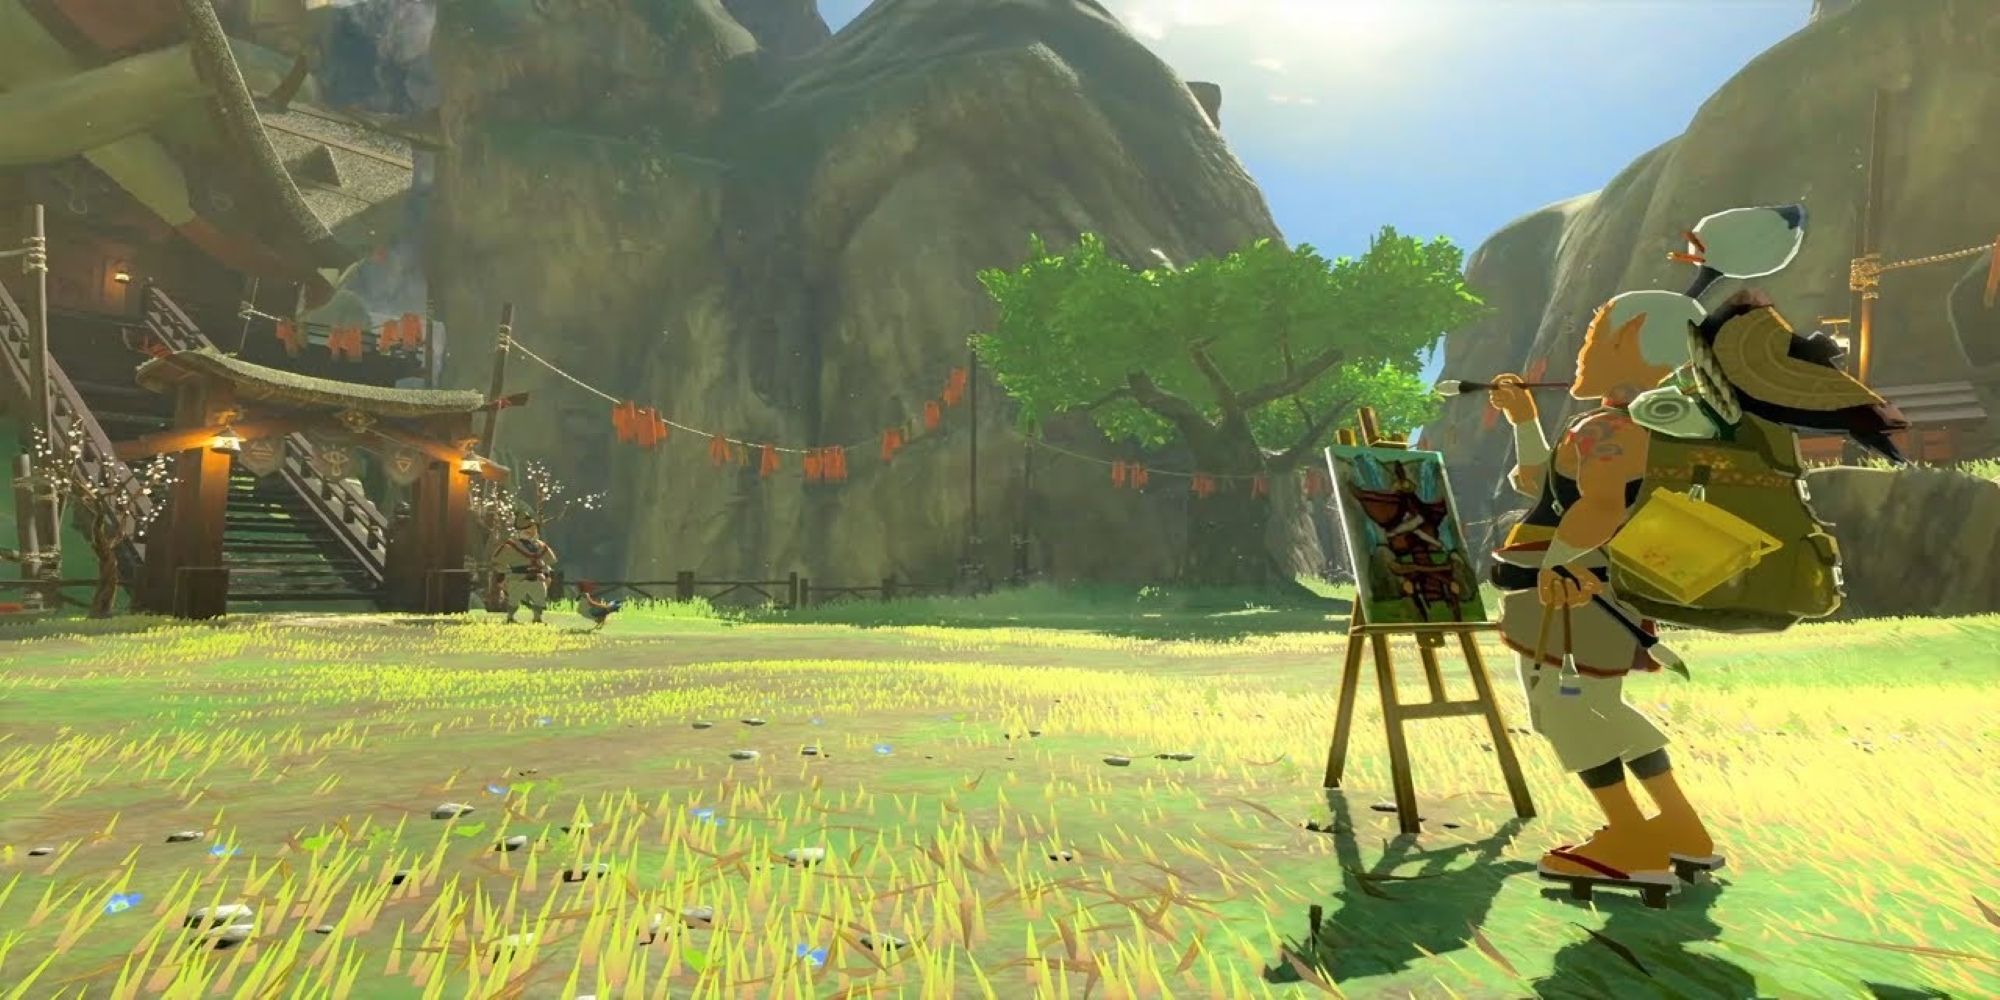 Pikango from The Legend of Zelda: Breath of the Wild paints a nearby structure.